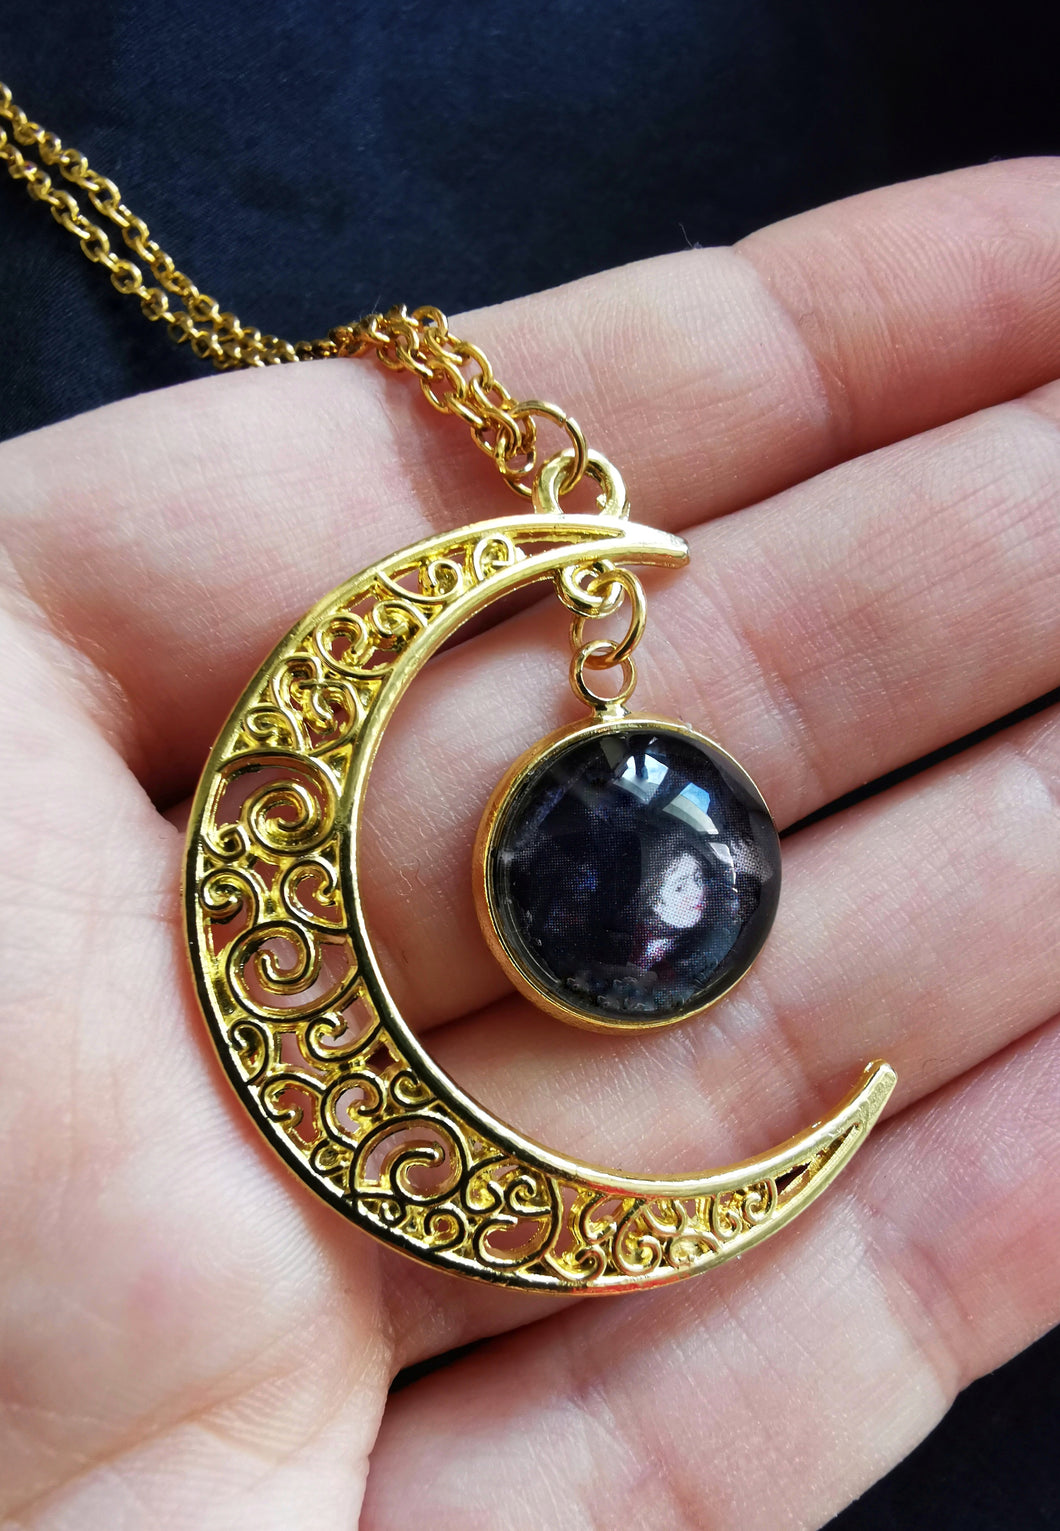 Lunar Witches

Necklace